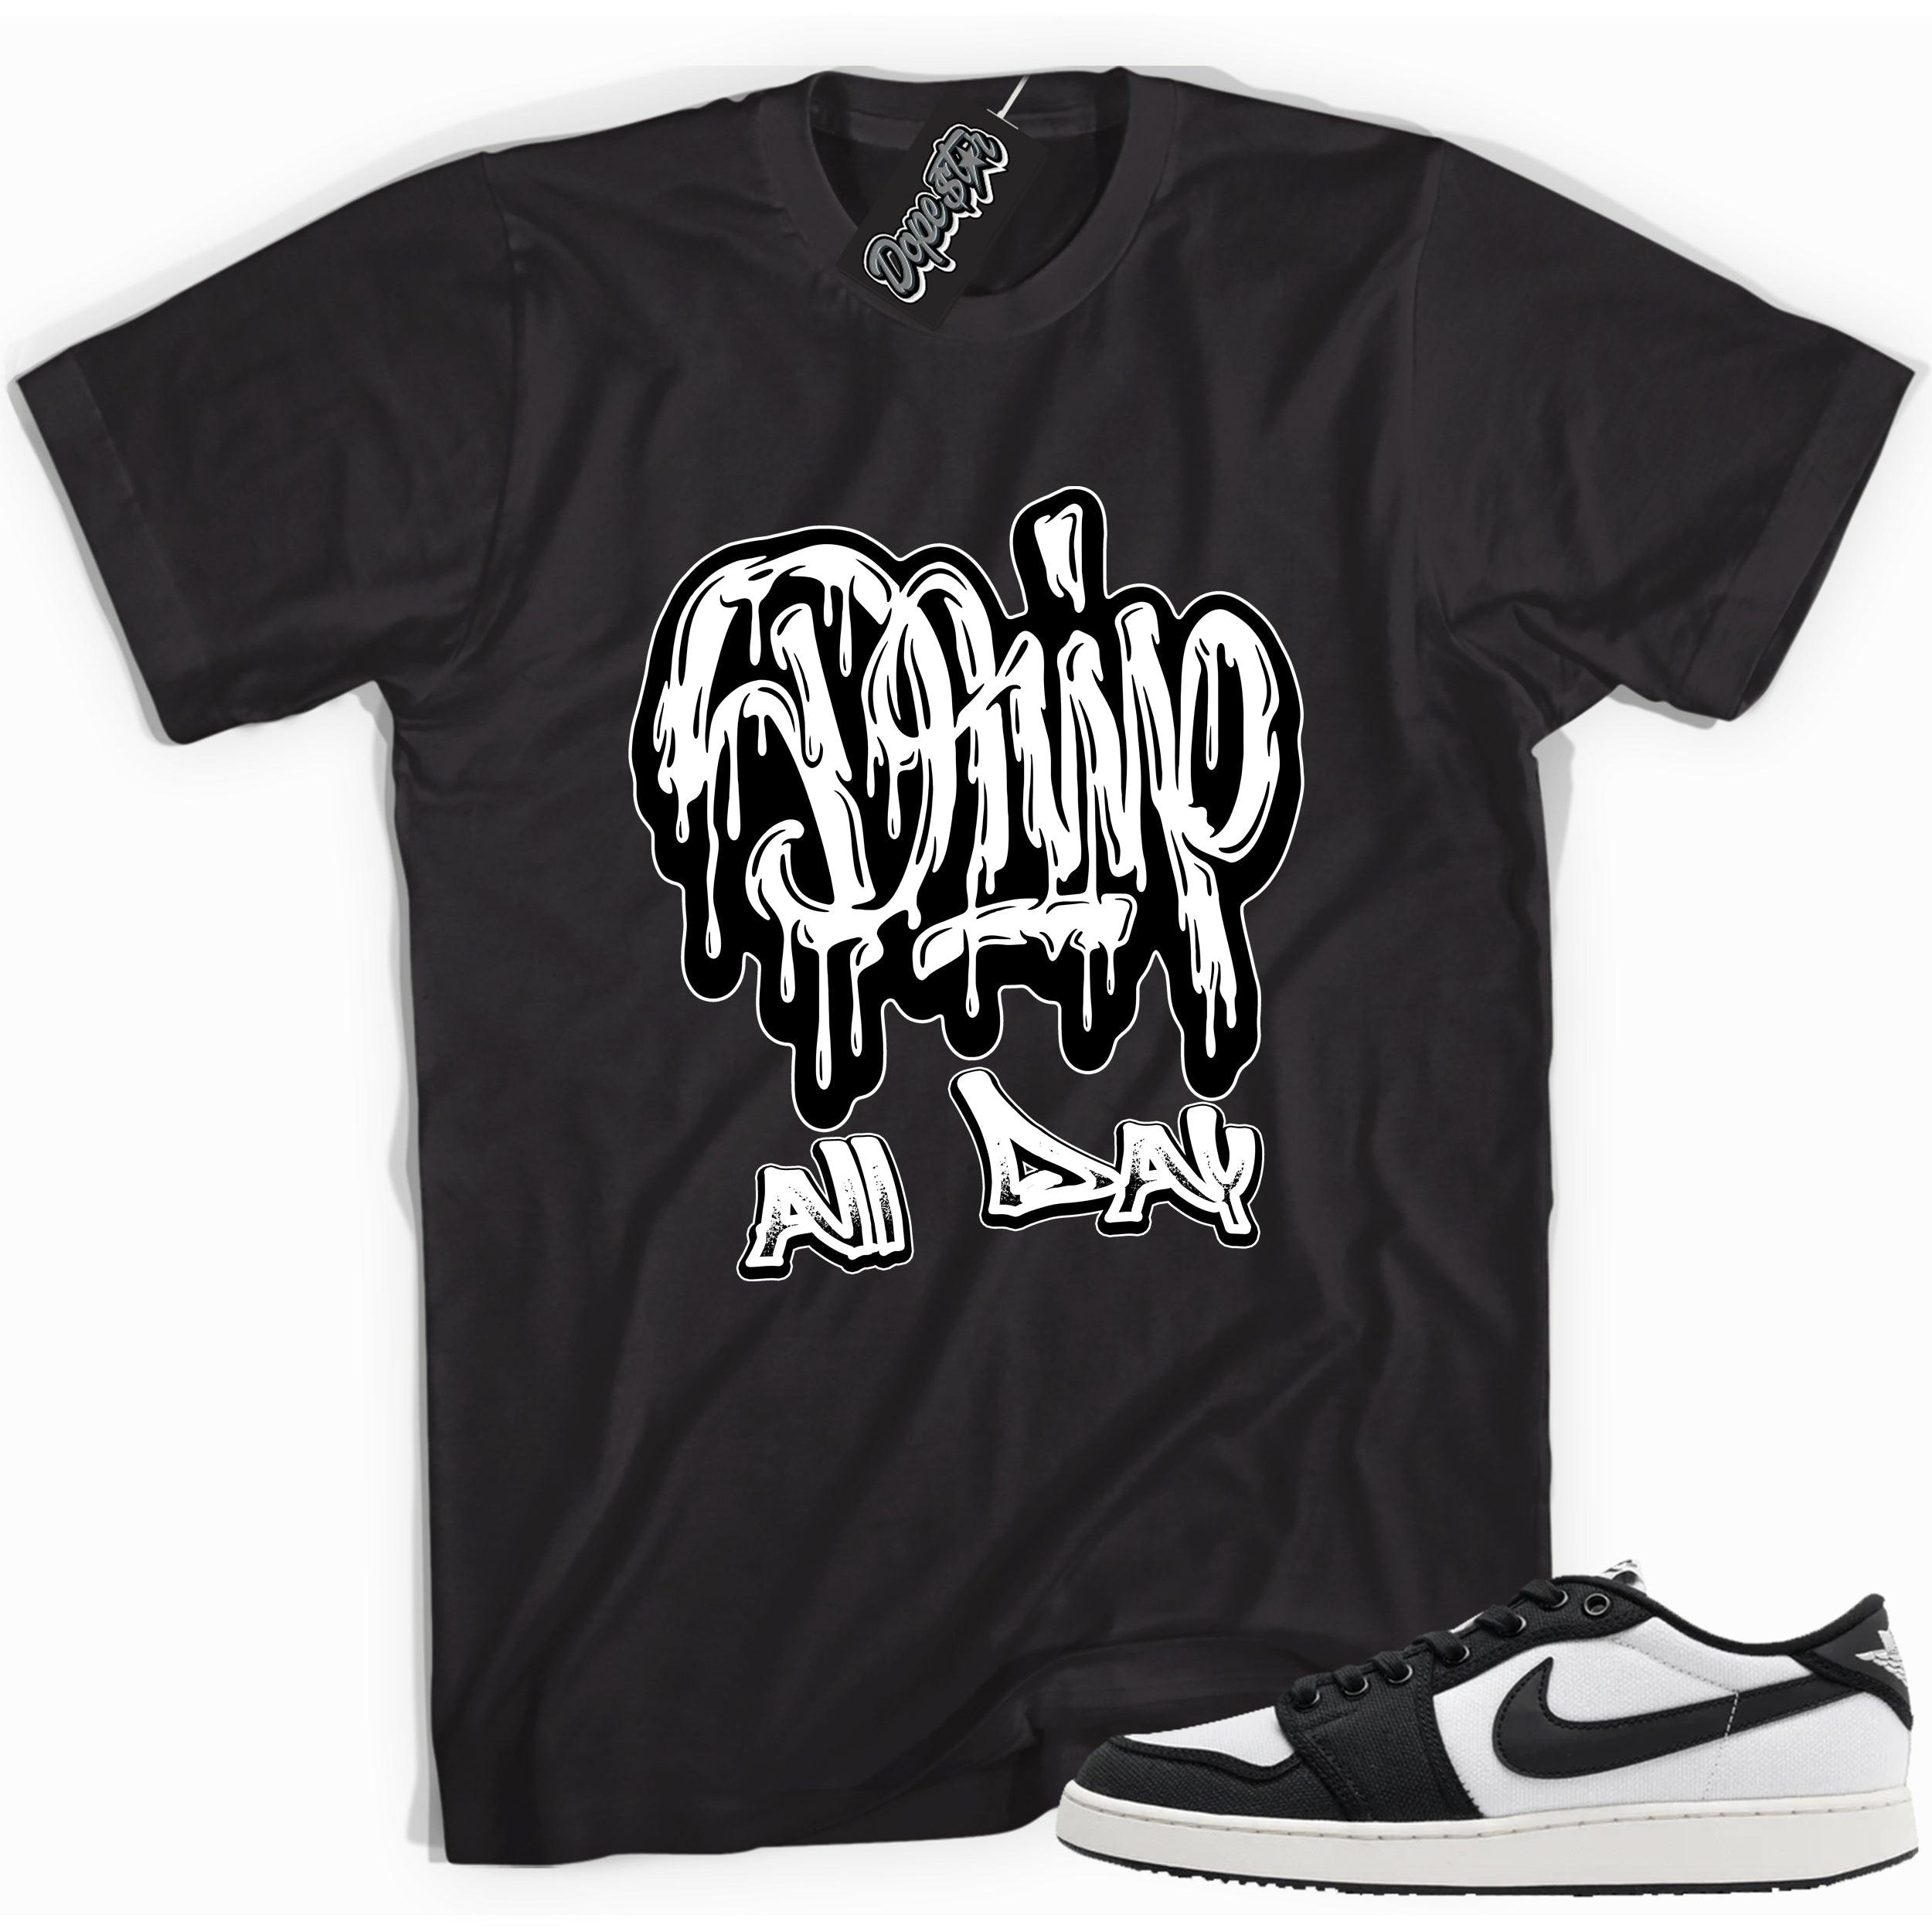 Cool black graphic tee with 'drip all day' print, that perfectly matches Air Jordan 1 Retro Ajko Low Black & White sneakers.